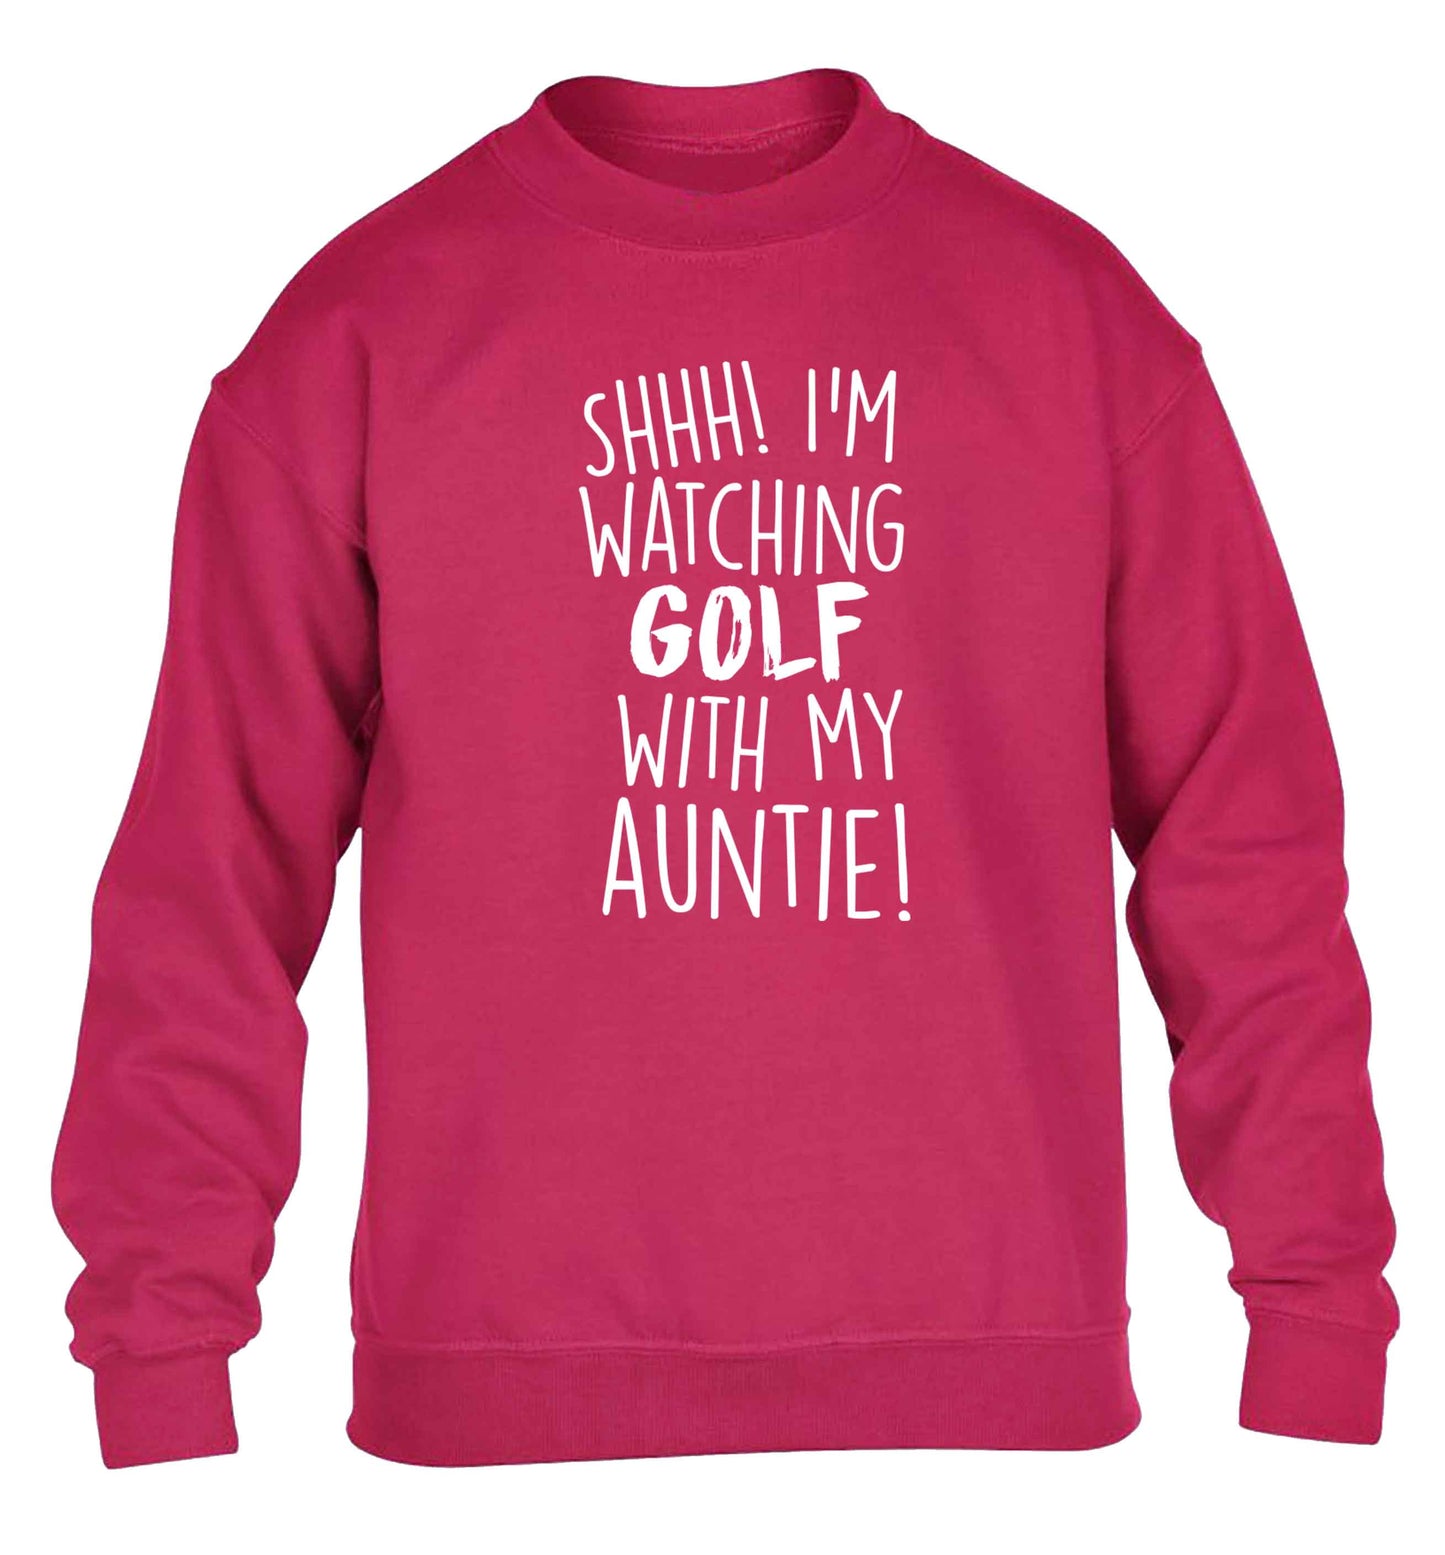 Shh I'm watching golf with my auntie children's pink sweater 12-13 Years